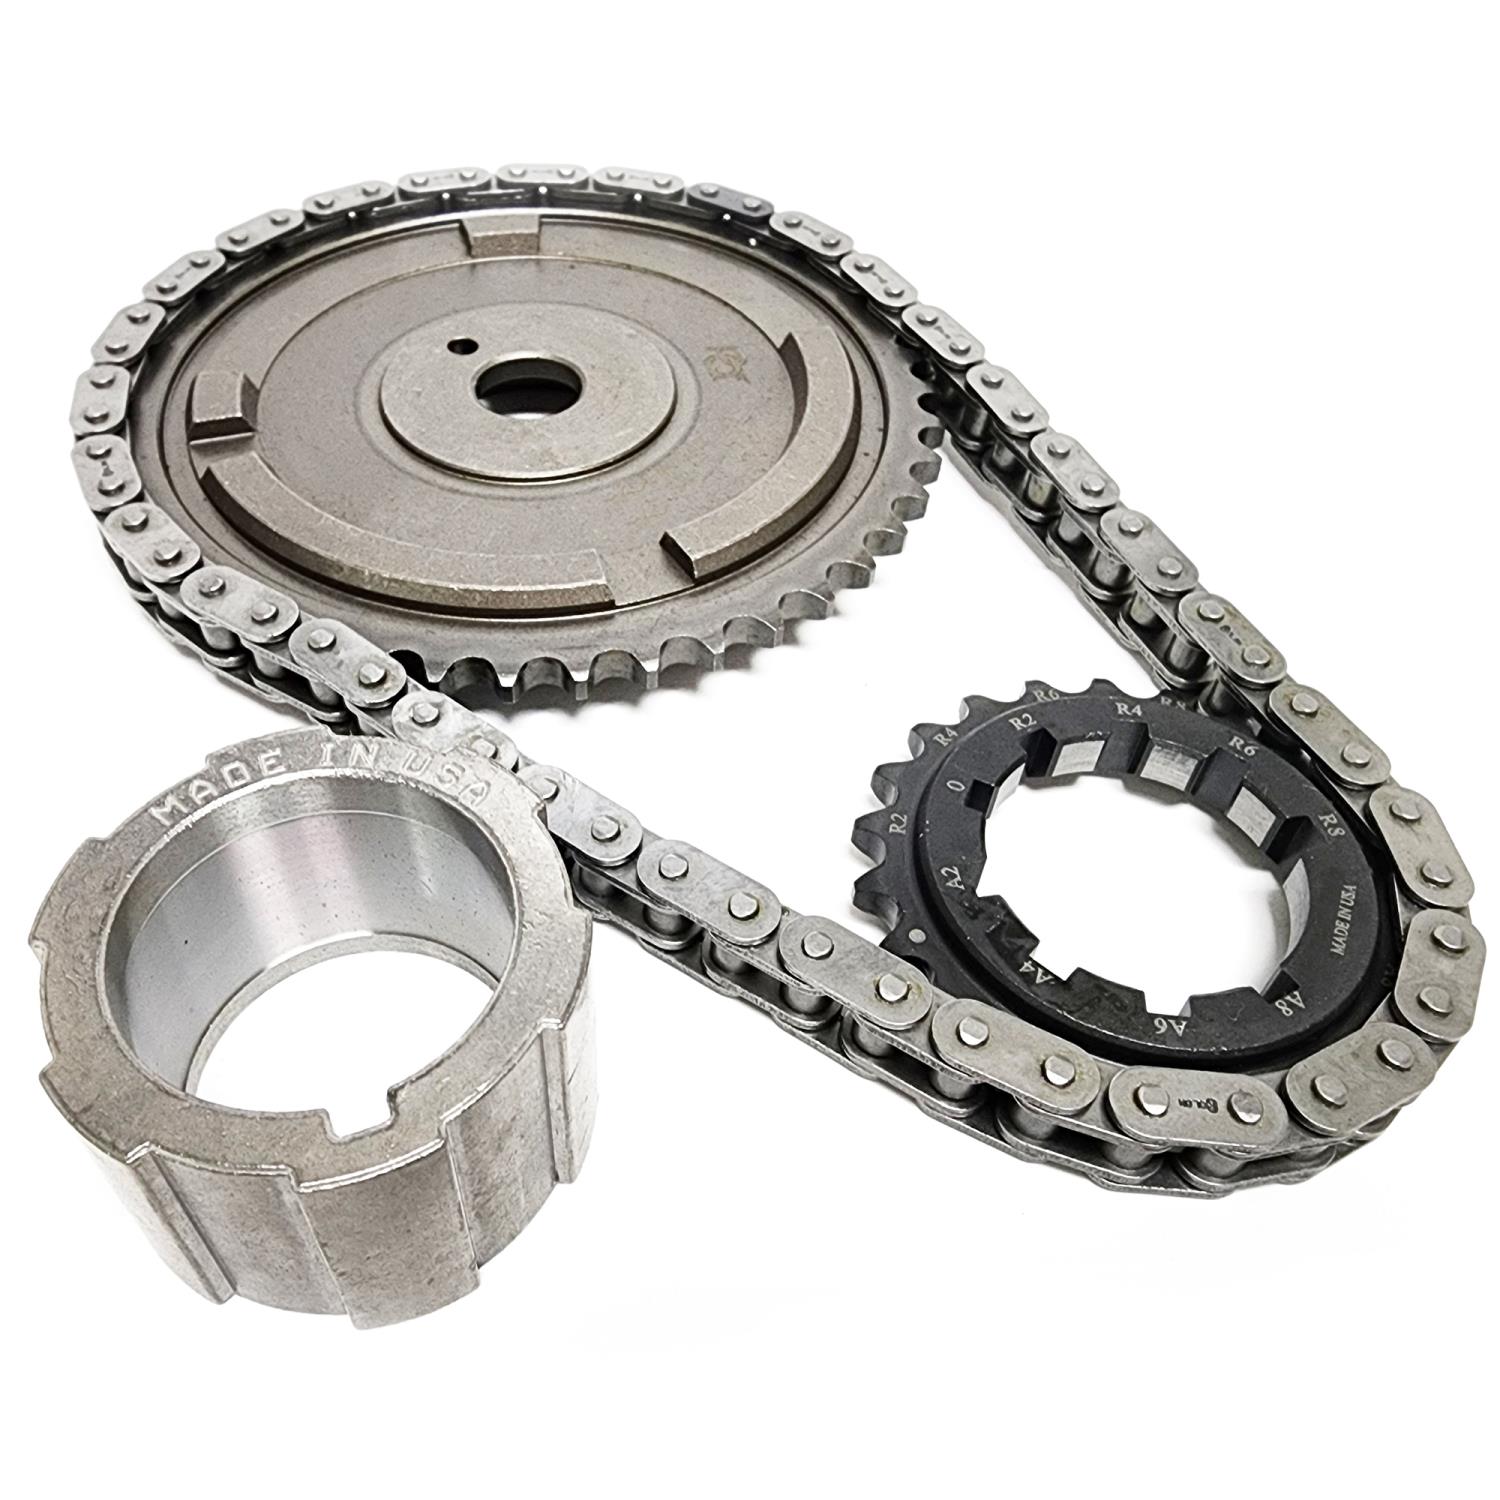 Single-Roller Timing Chain and Gear Set for 2007-2010